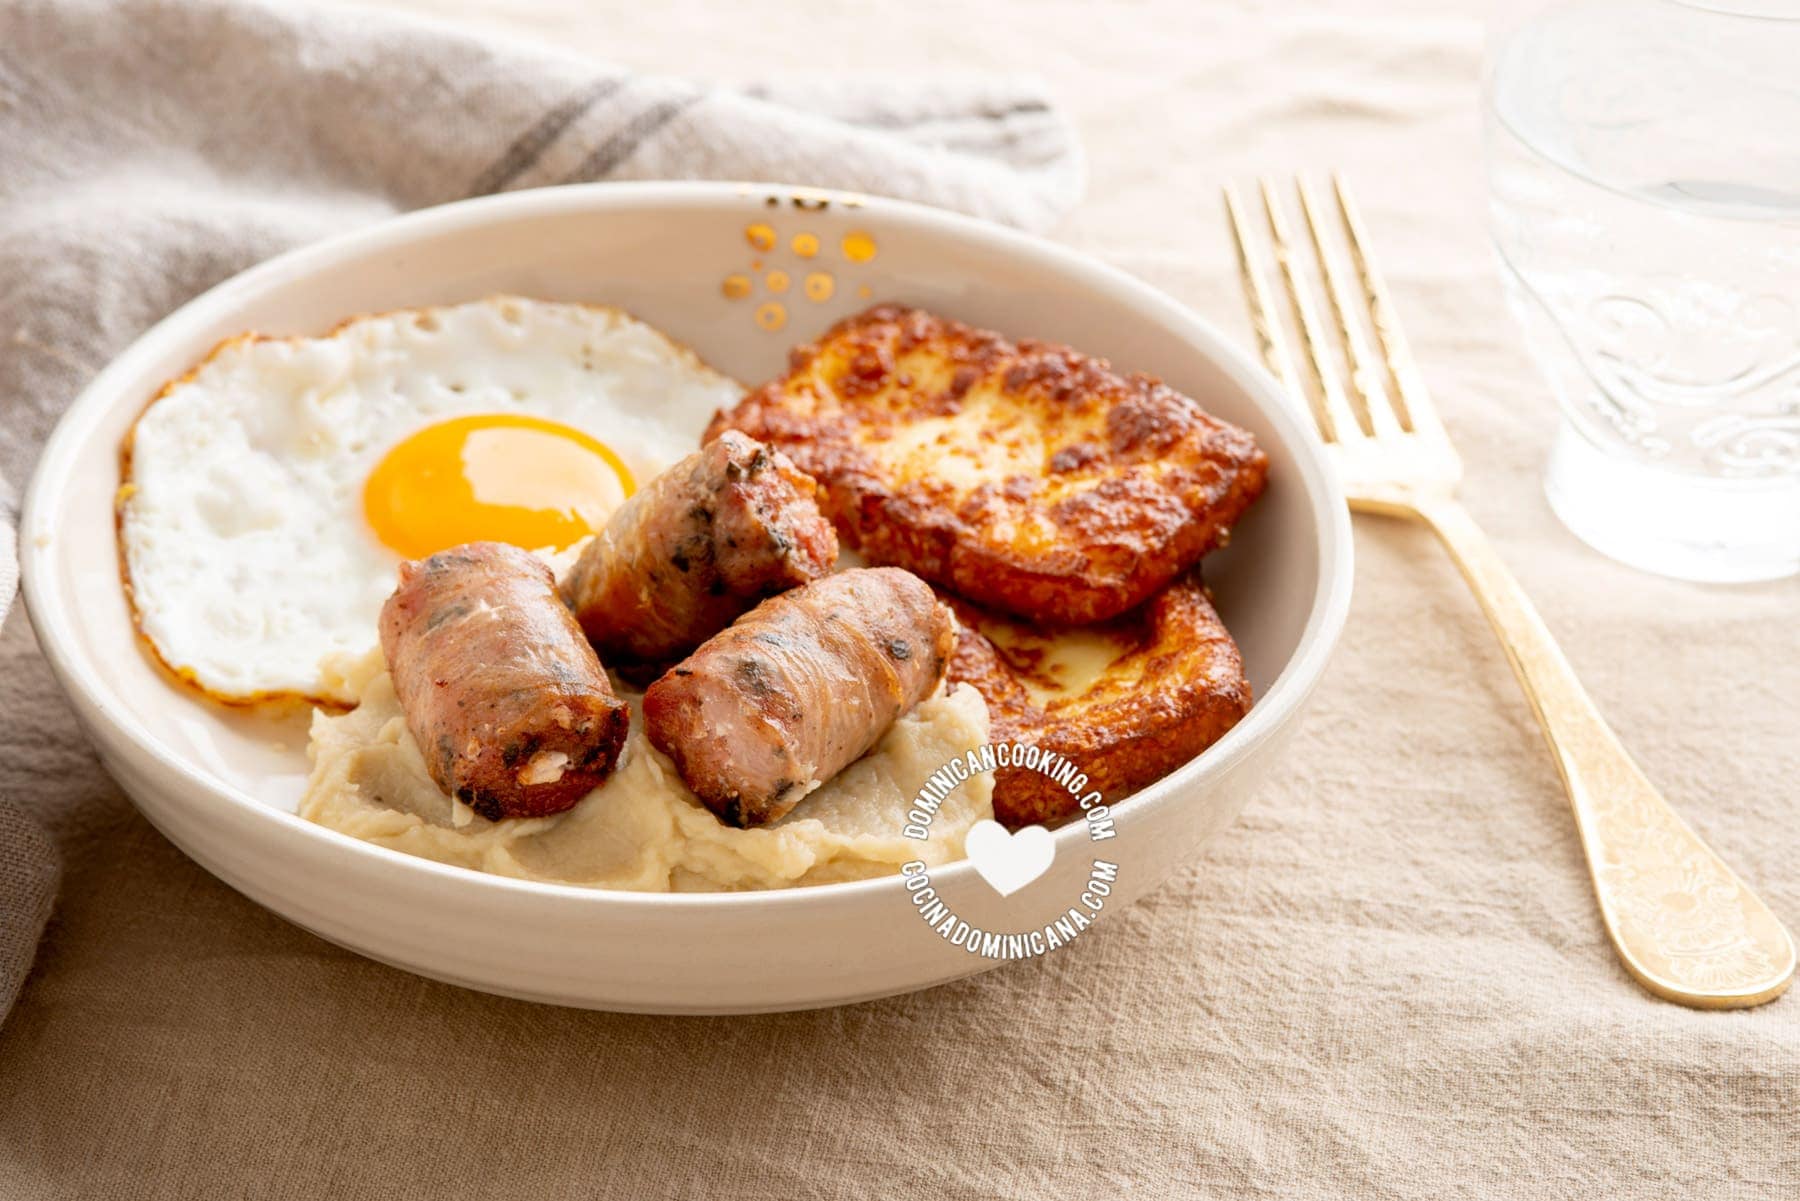 Dominican keto breakfast of fried cheese, egg and sausage with mash